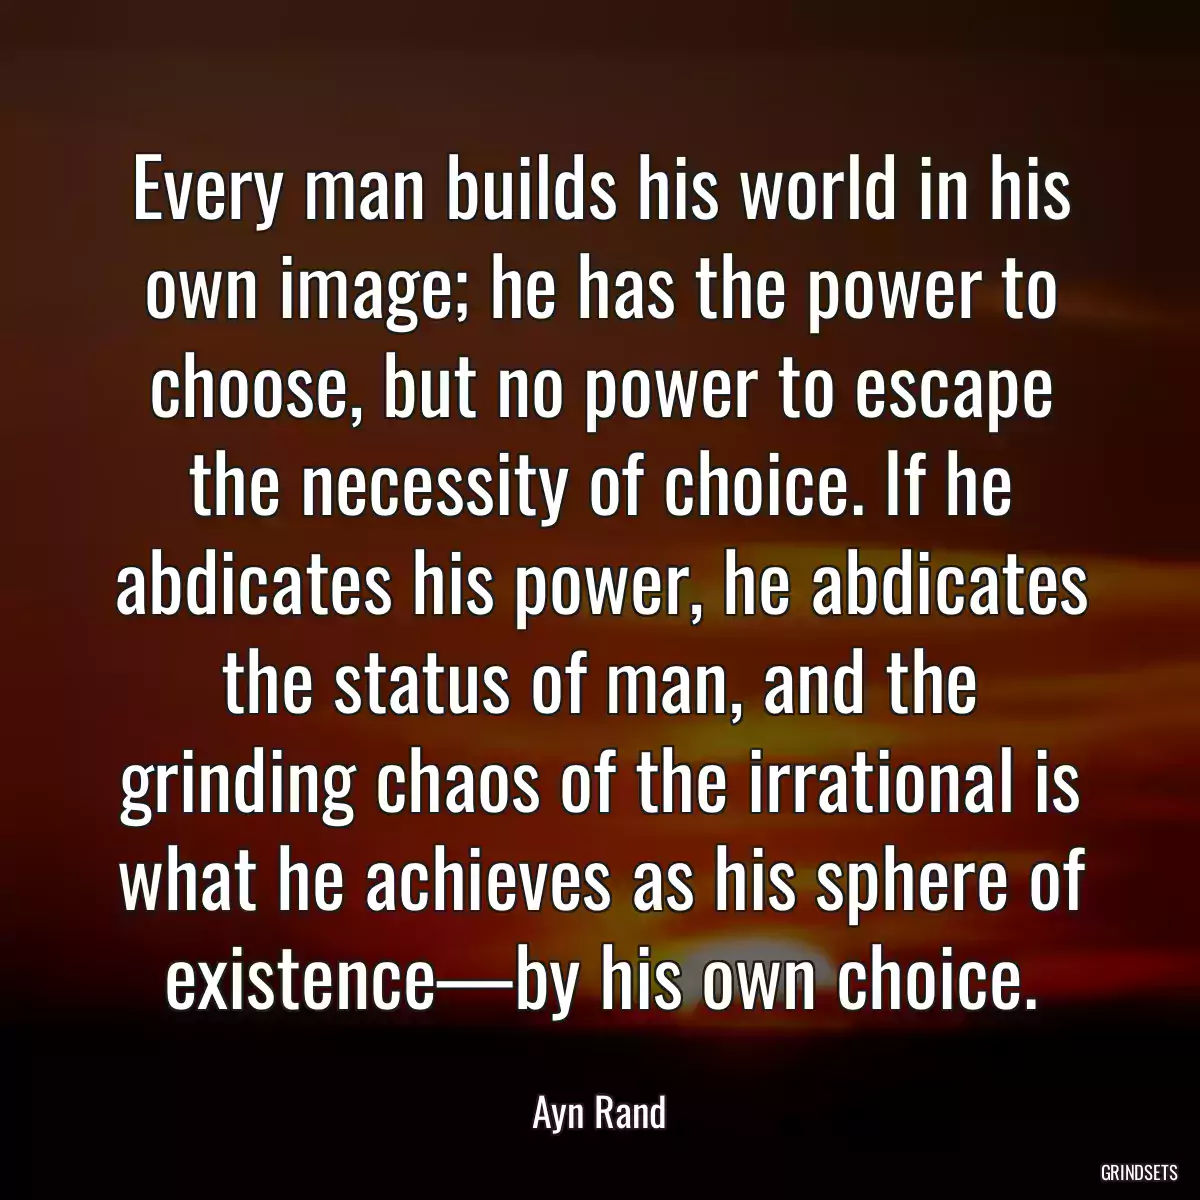 Every man builds his world in his own image; he has the power to choose, but no power to escape the necessity of choice. If he abdicates his power, he abdicates the status of man, and the grinding chaos of the irrational is what he achieves as his sphere of existence—by his own choice.